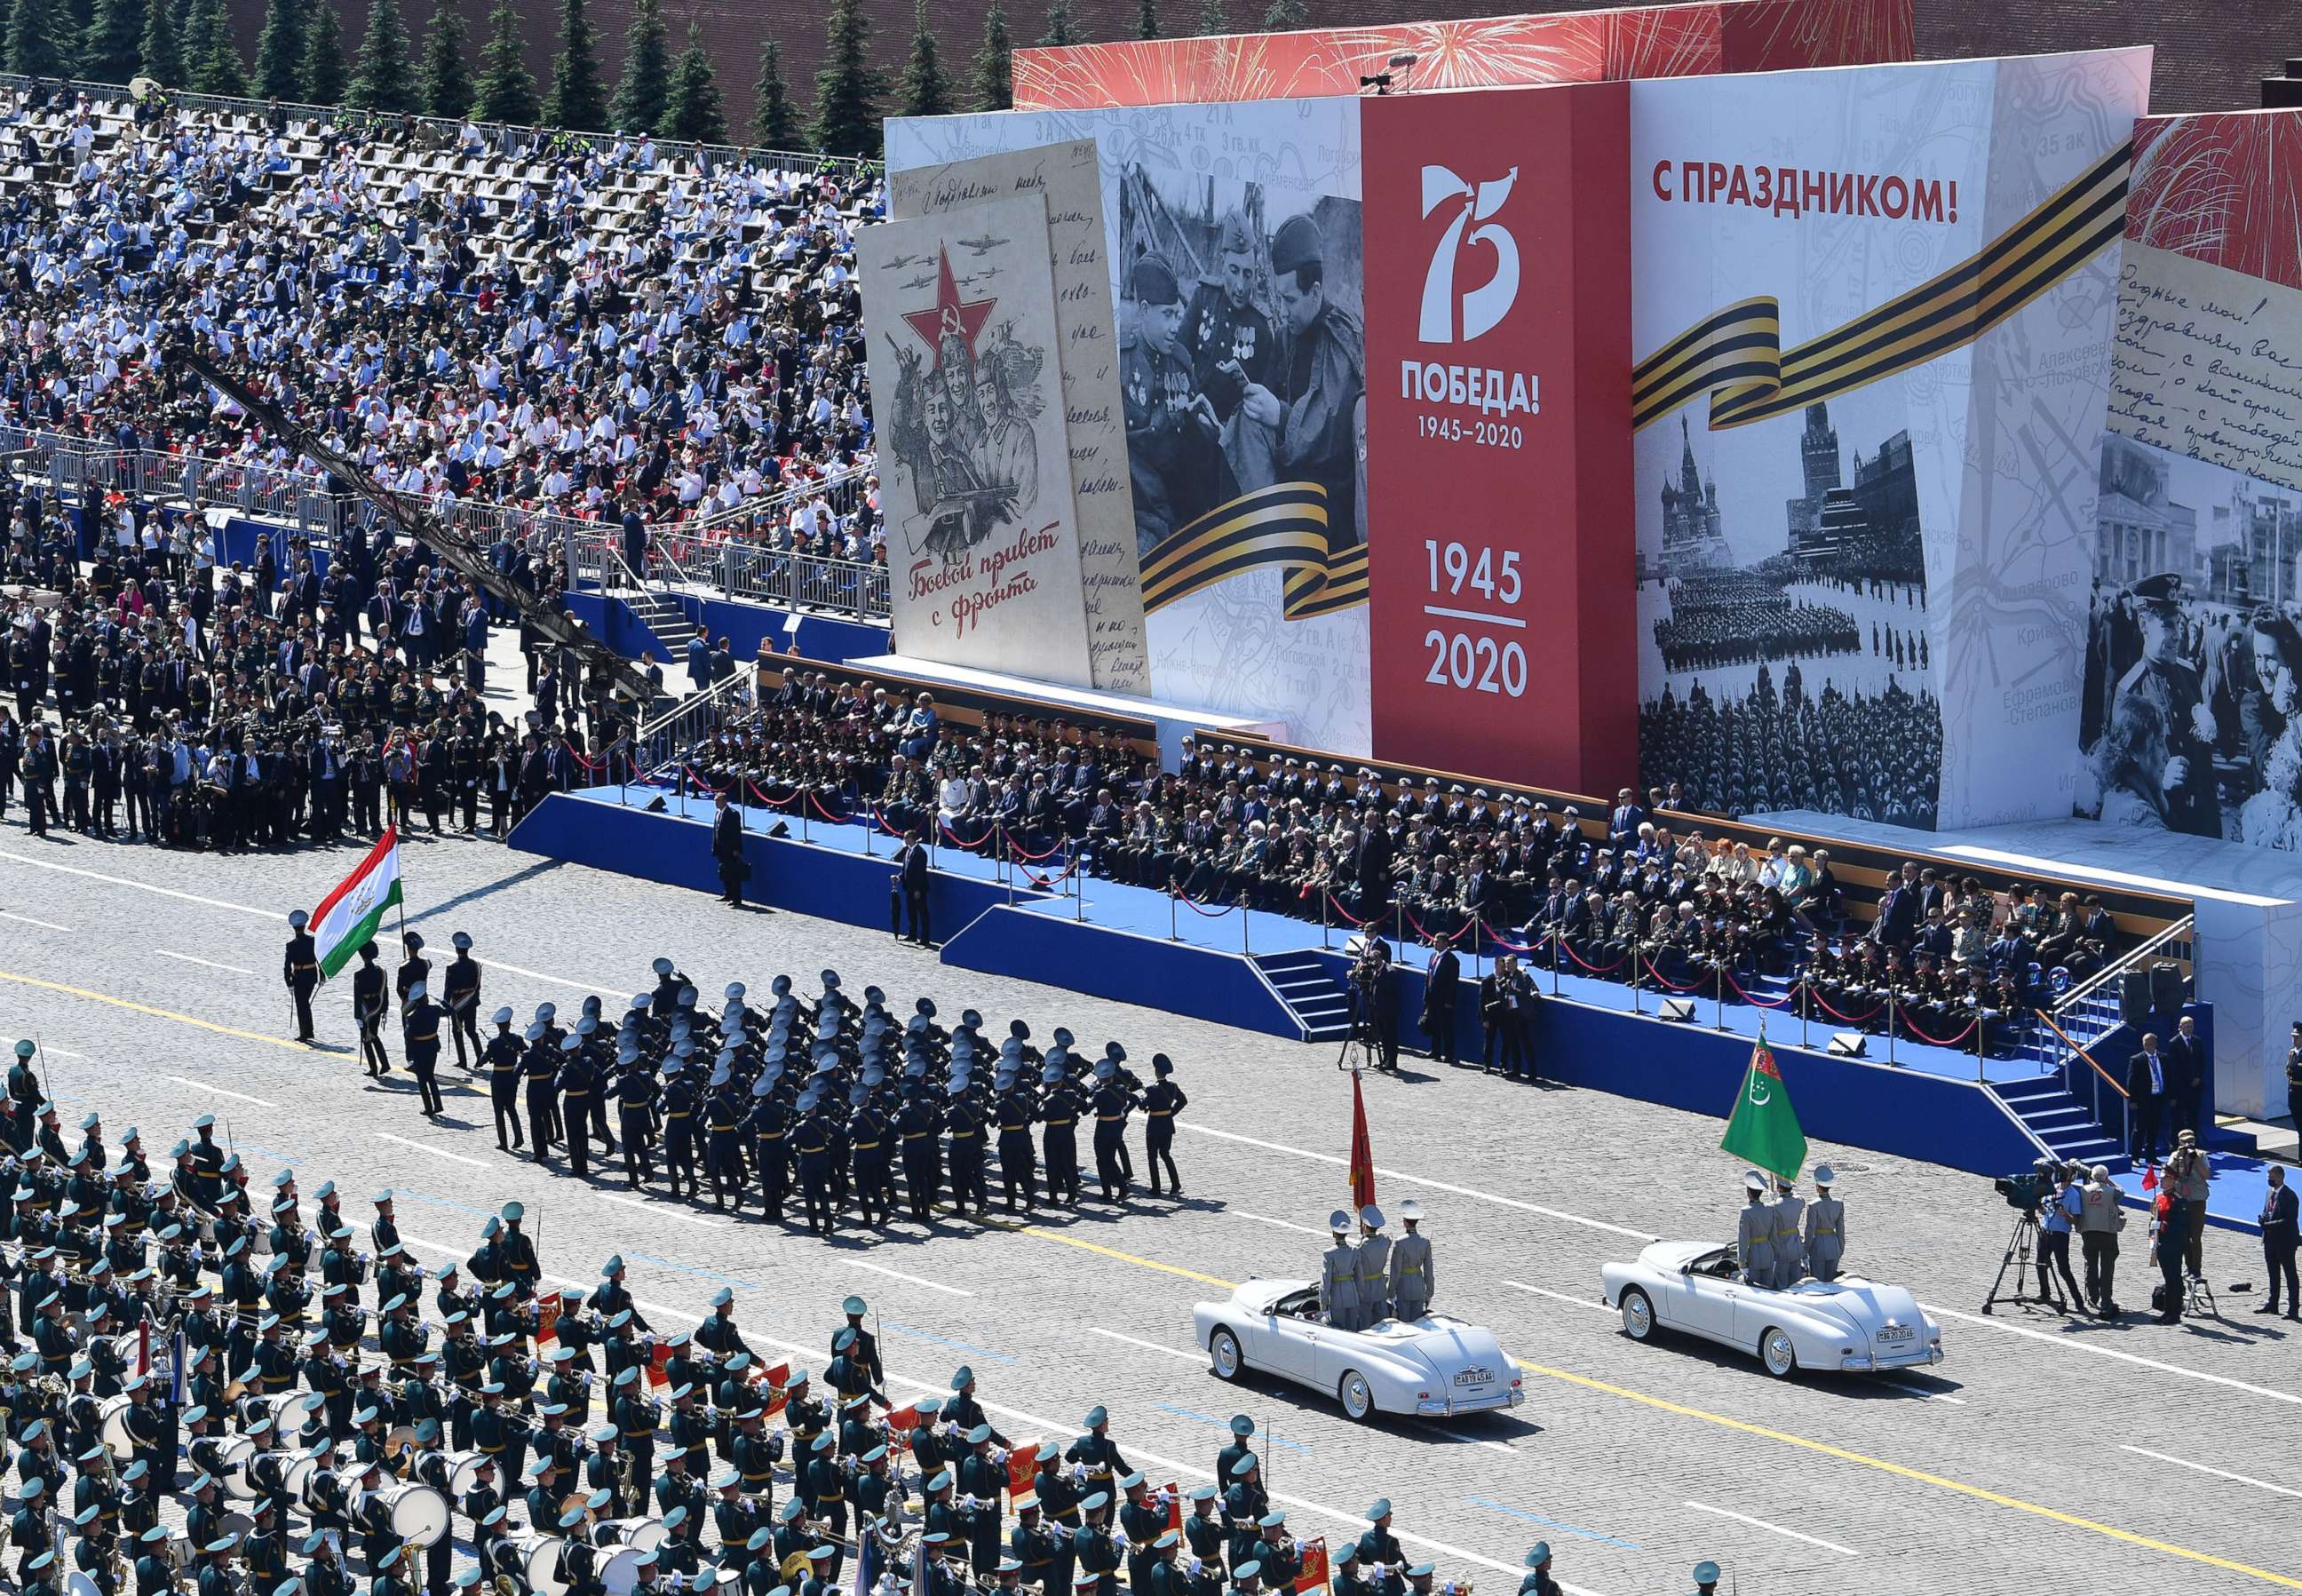 PHOTO: Tajikistan and Turkmenstan servicemen march during the Victory Day military parade in Red Square marking the 75th anniversary of the victory in World War II, on June 24, 2020, in Moscow.